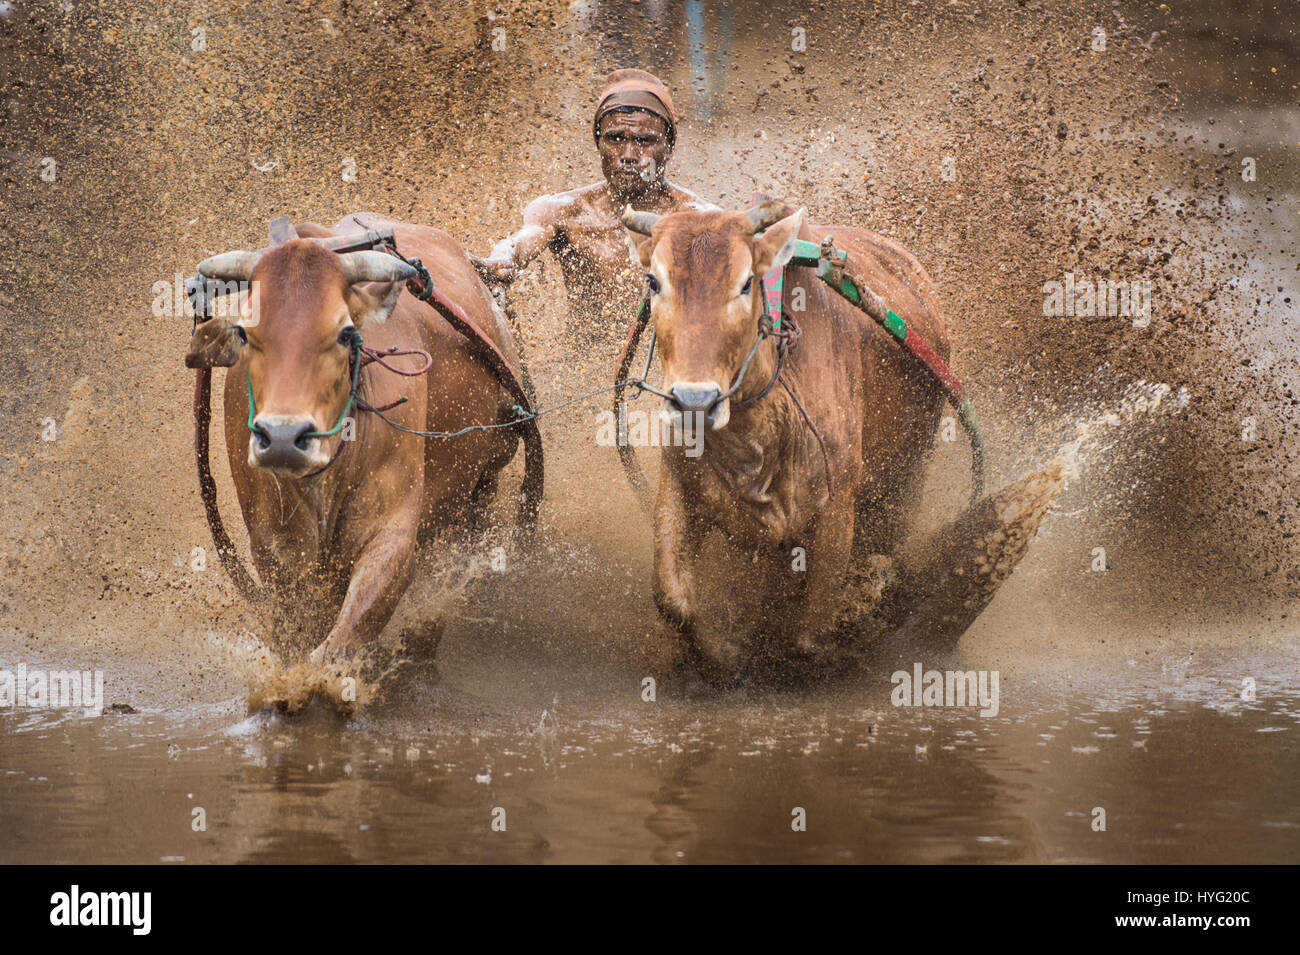 BATU SANGKAR, INDONESIA: SPECTACULAR images of farmers racing their prize bulls through mud will set your pulse racing. Pictures show how the brave competitors in this seasonal race will stop at nothing to prove the strength of their bulls and their skill in racing them through the most difficult terrain. Malaysian photographer Mohd Irman Ismail took the pictures during the Pacu Jawi festival in Batu Sangkar, West Sumatra , Indonesia. Stock Photo